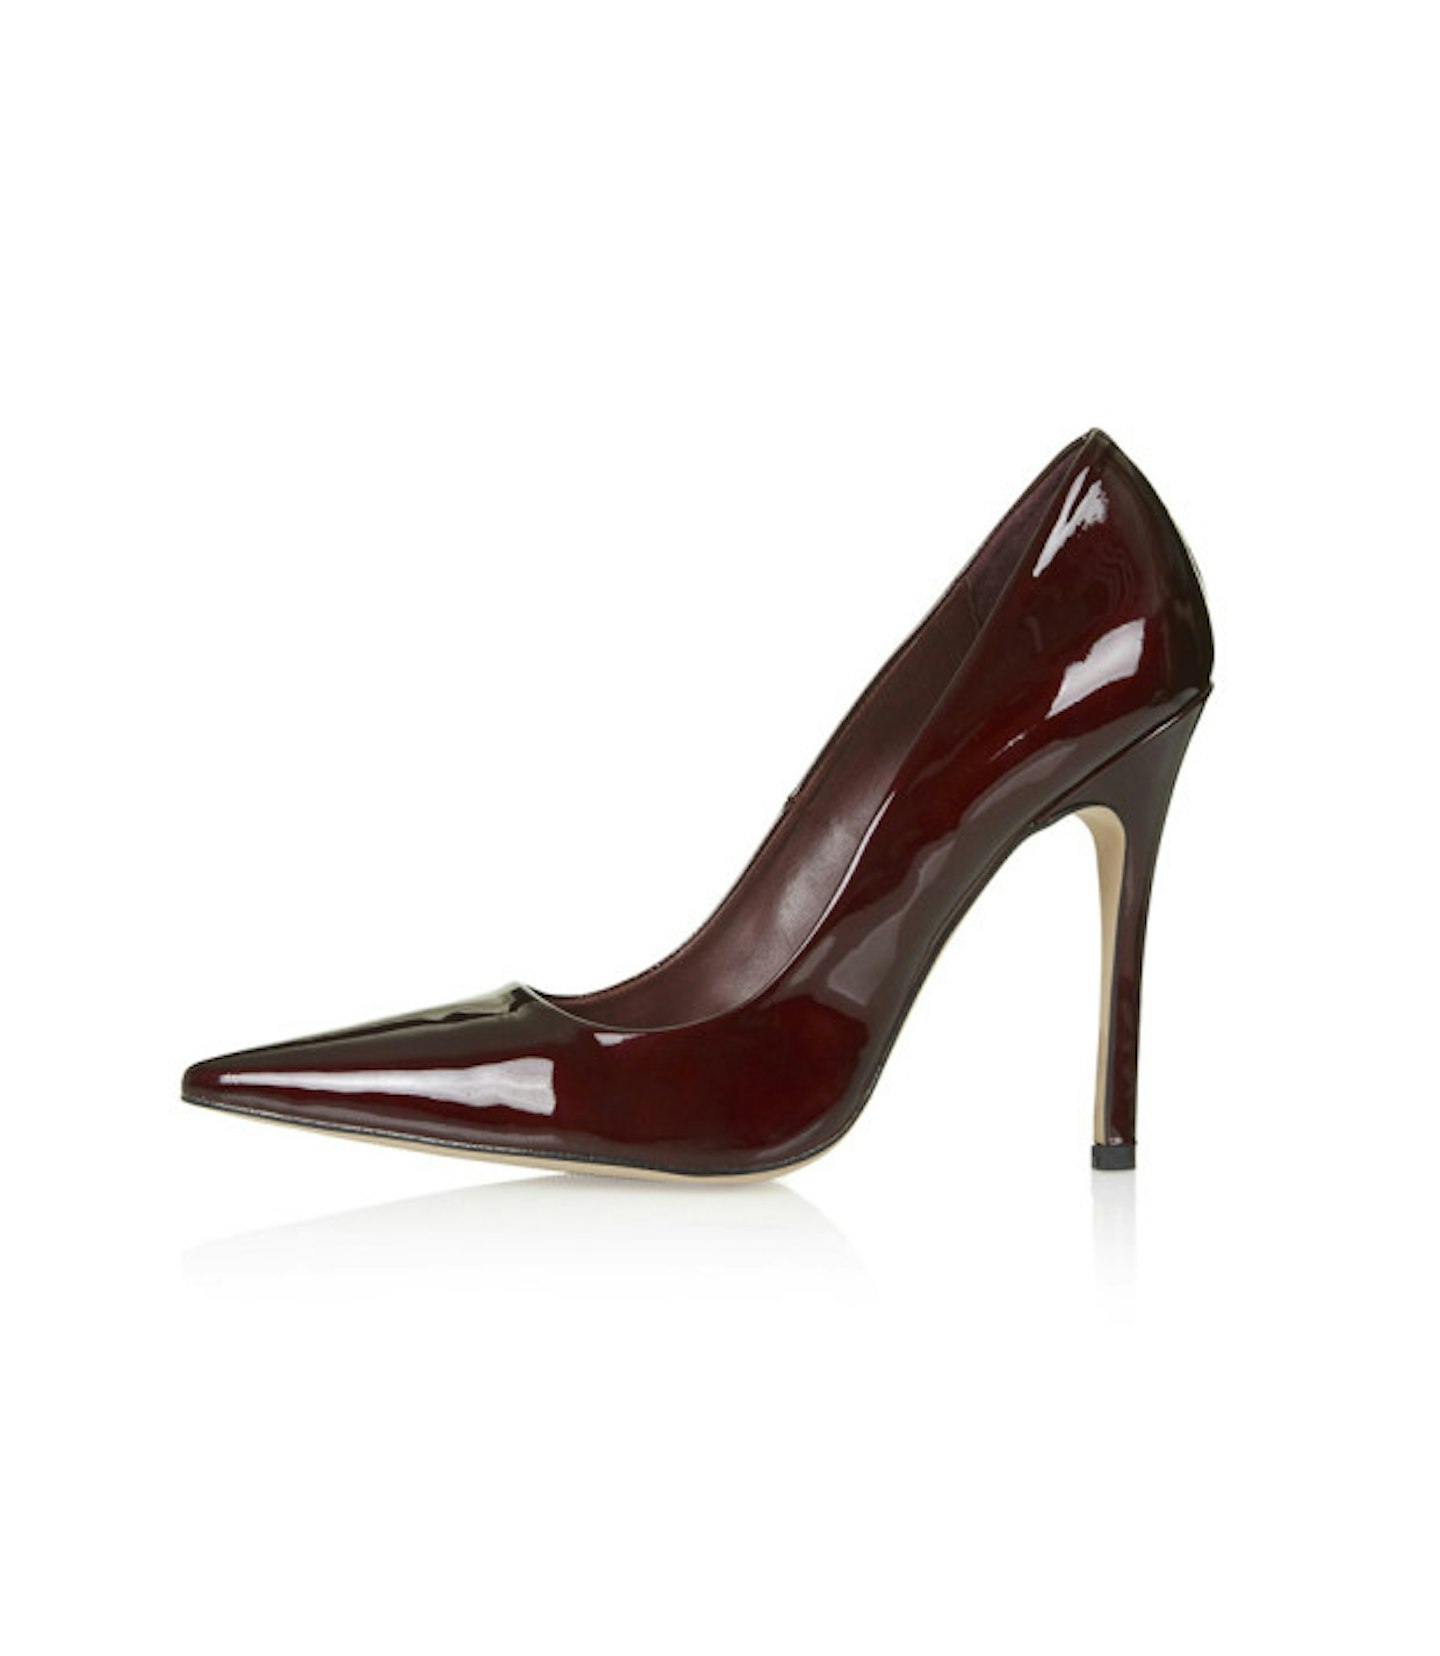 six-o-clock-shoes-topshop-burgundy-patent-courts